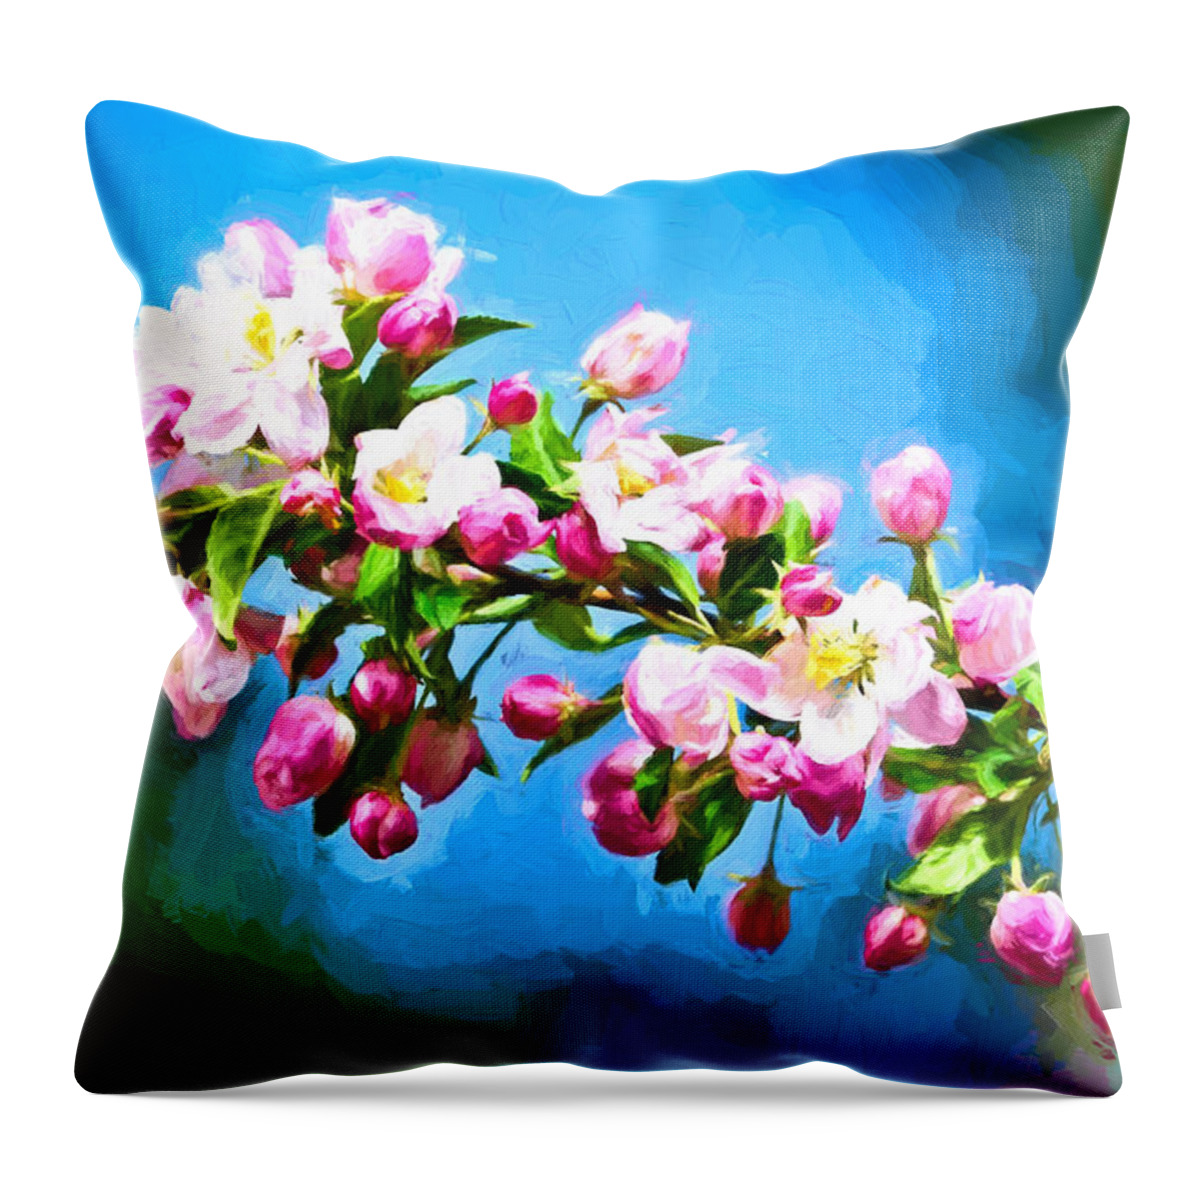 Spring Throw Pillow featuring the photograph Spring Impressions by Greg Norrell